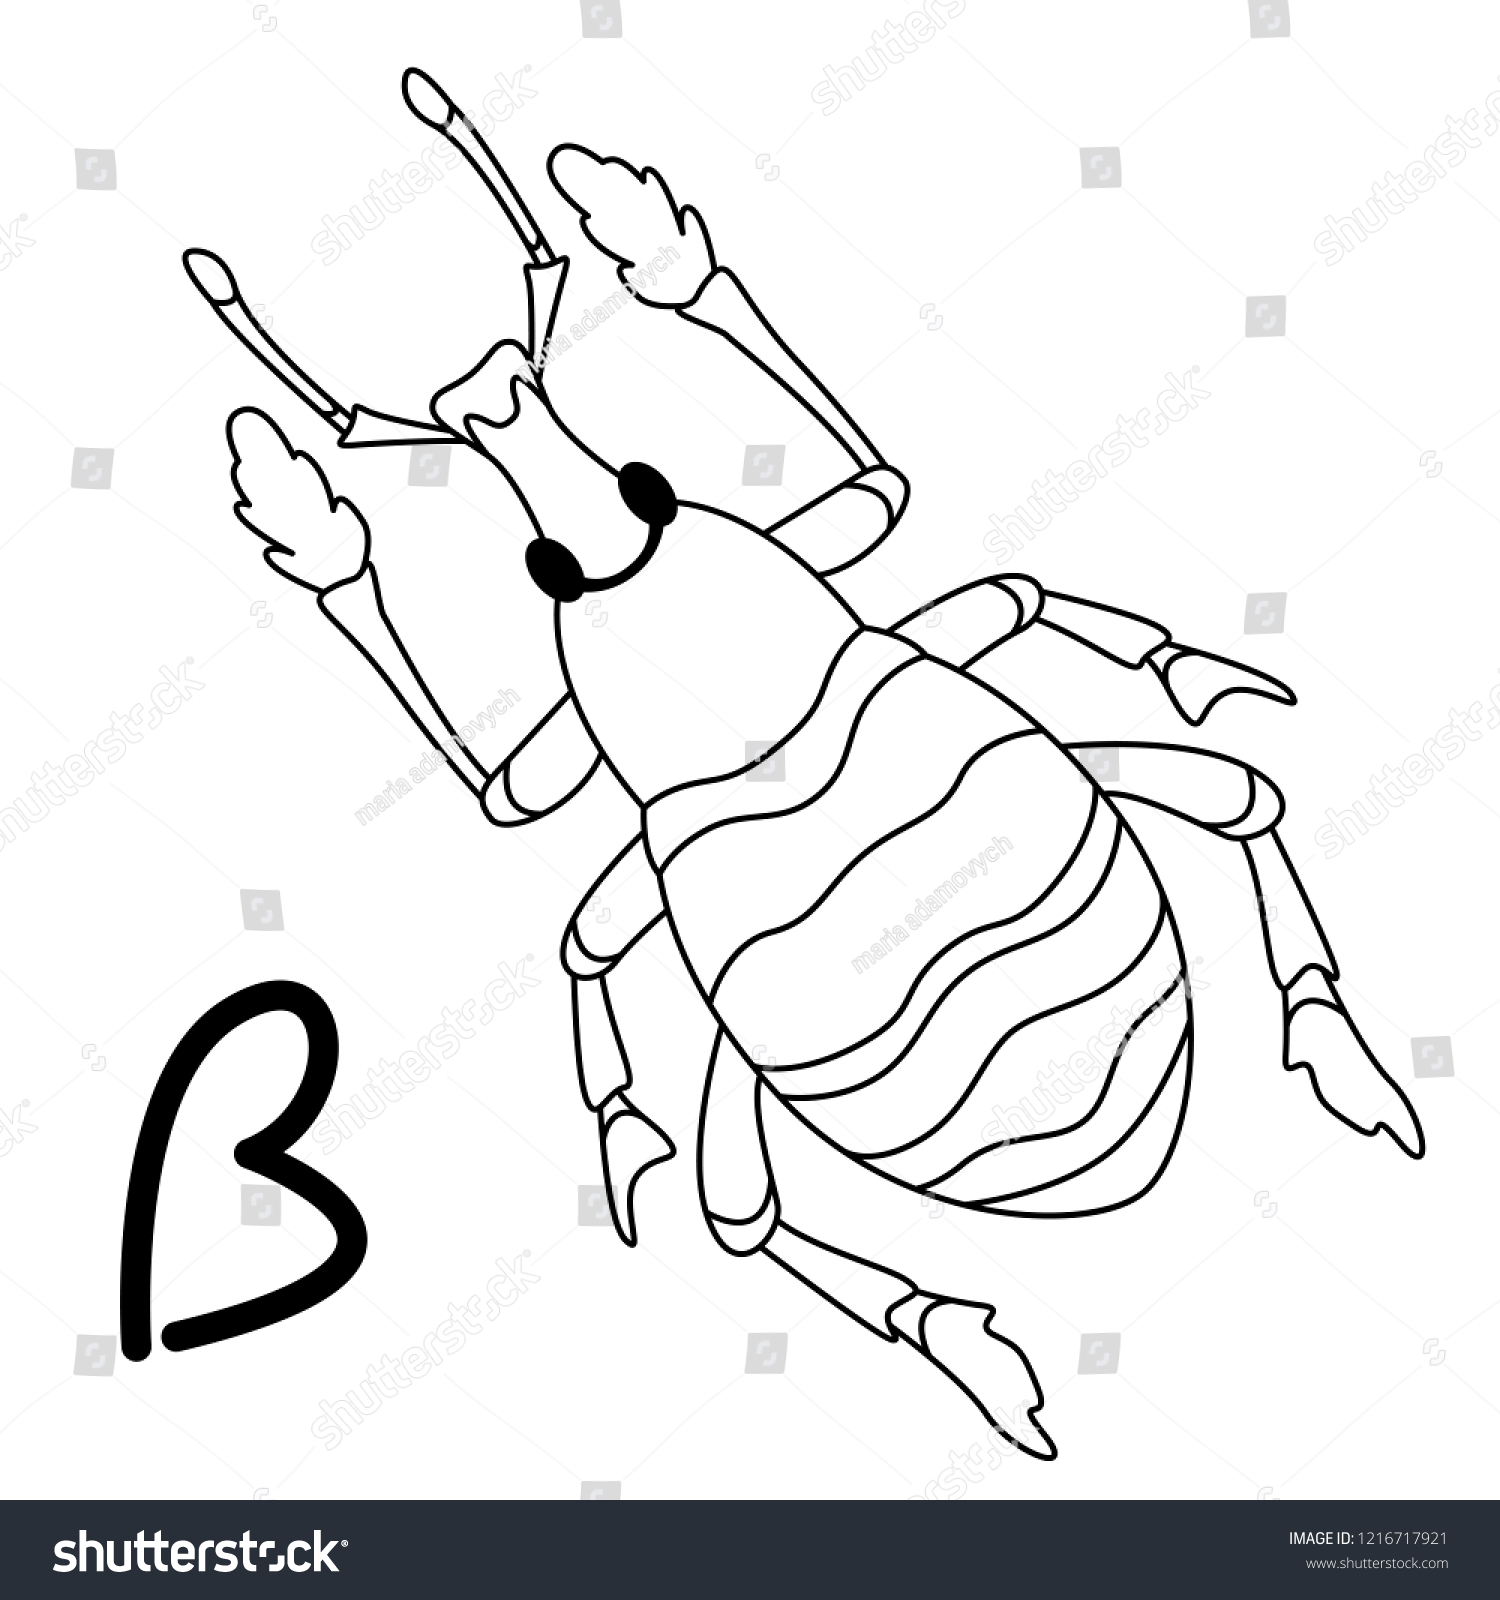 Beetle Weevil Vector Illustration Coloring Book Stock Vector (Royalty ...